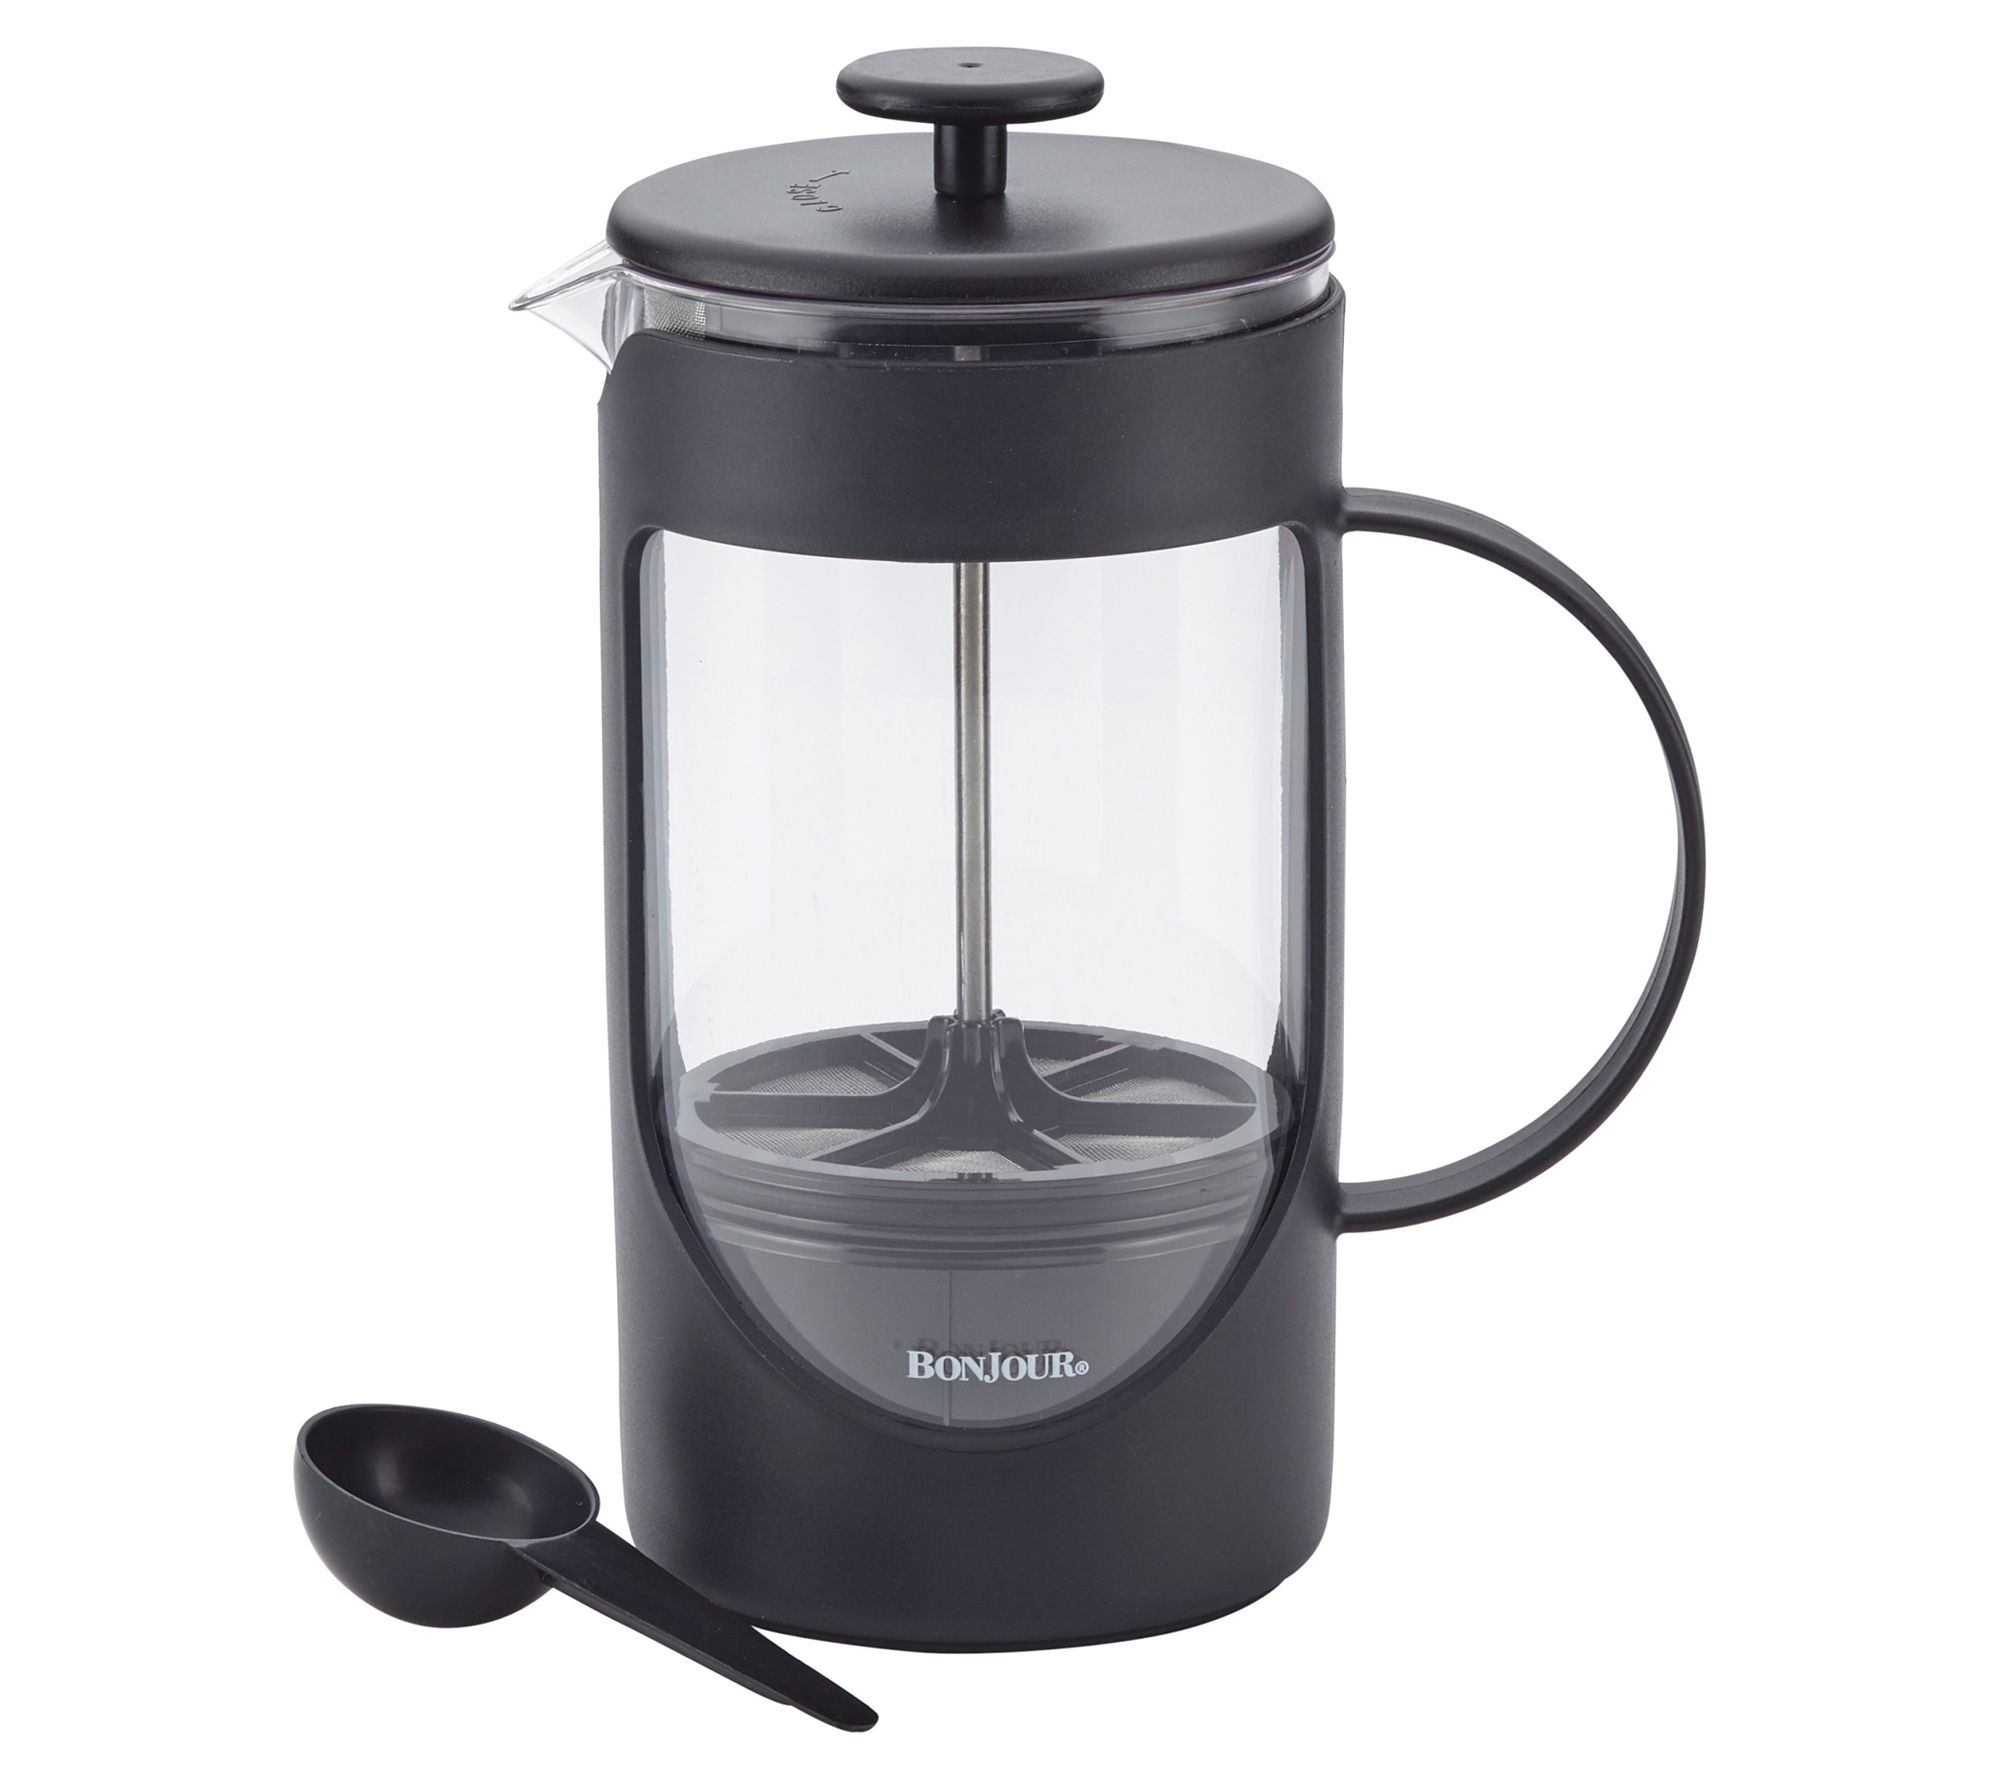 BonJour Monet Milk Frother Replacement Carafe & Reviews